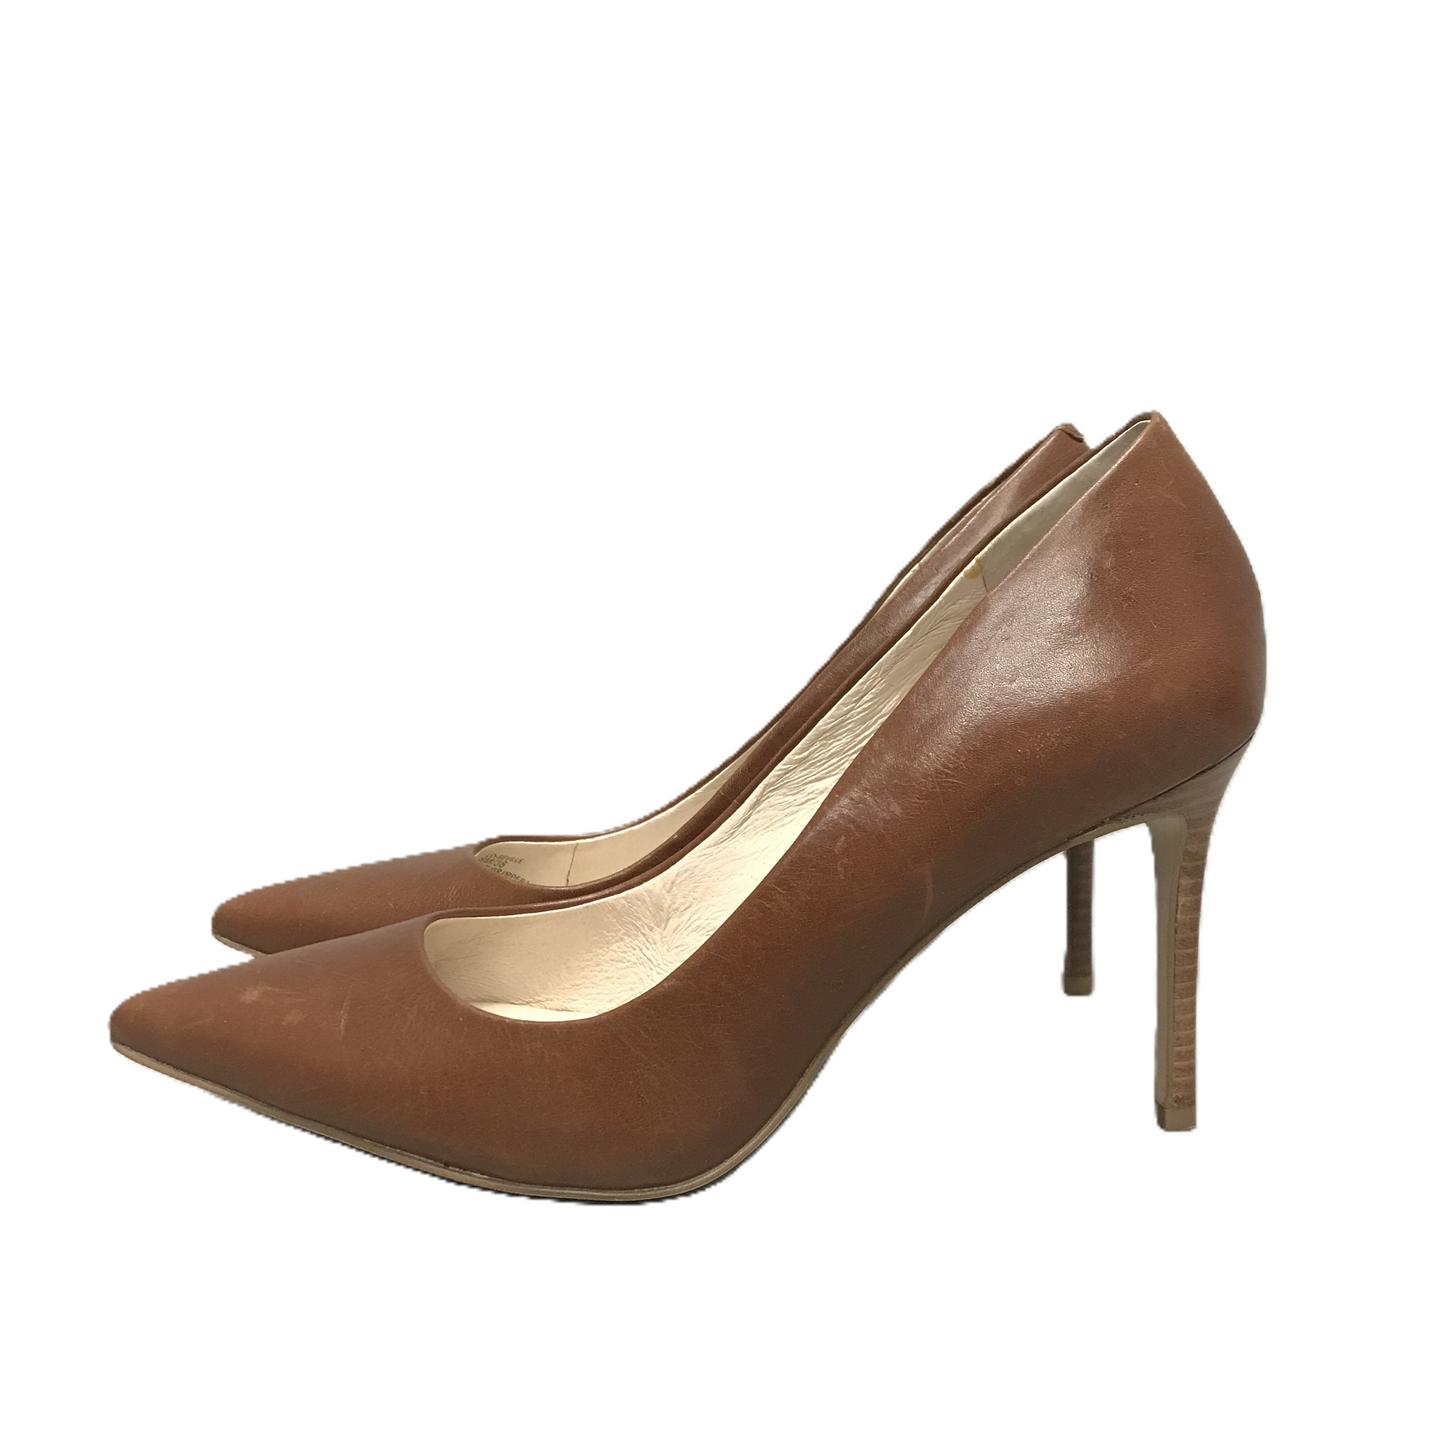 Brown Shoes Heels Stiletto By Louise Et Cie, Size: 8